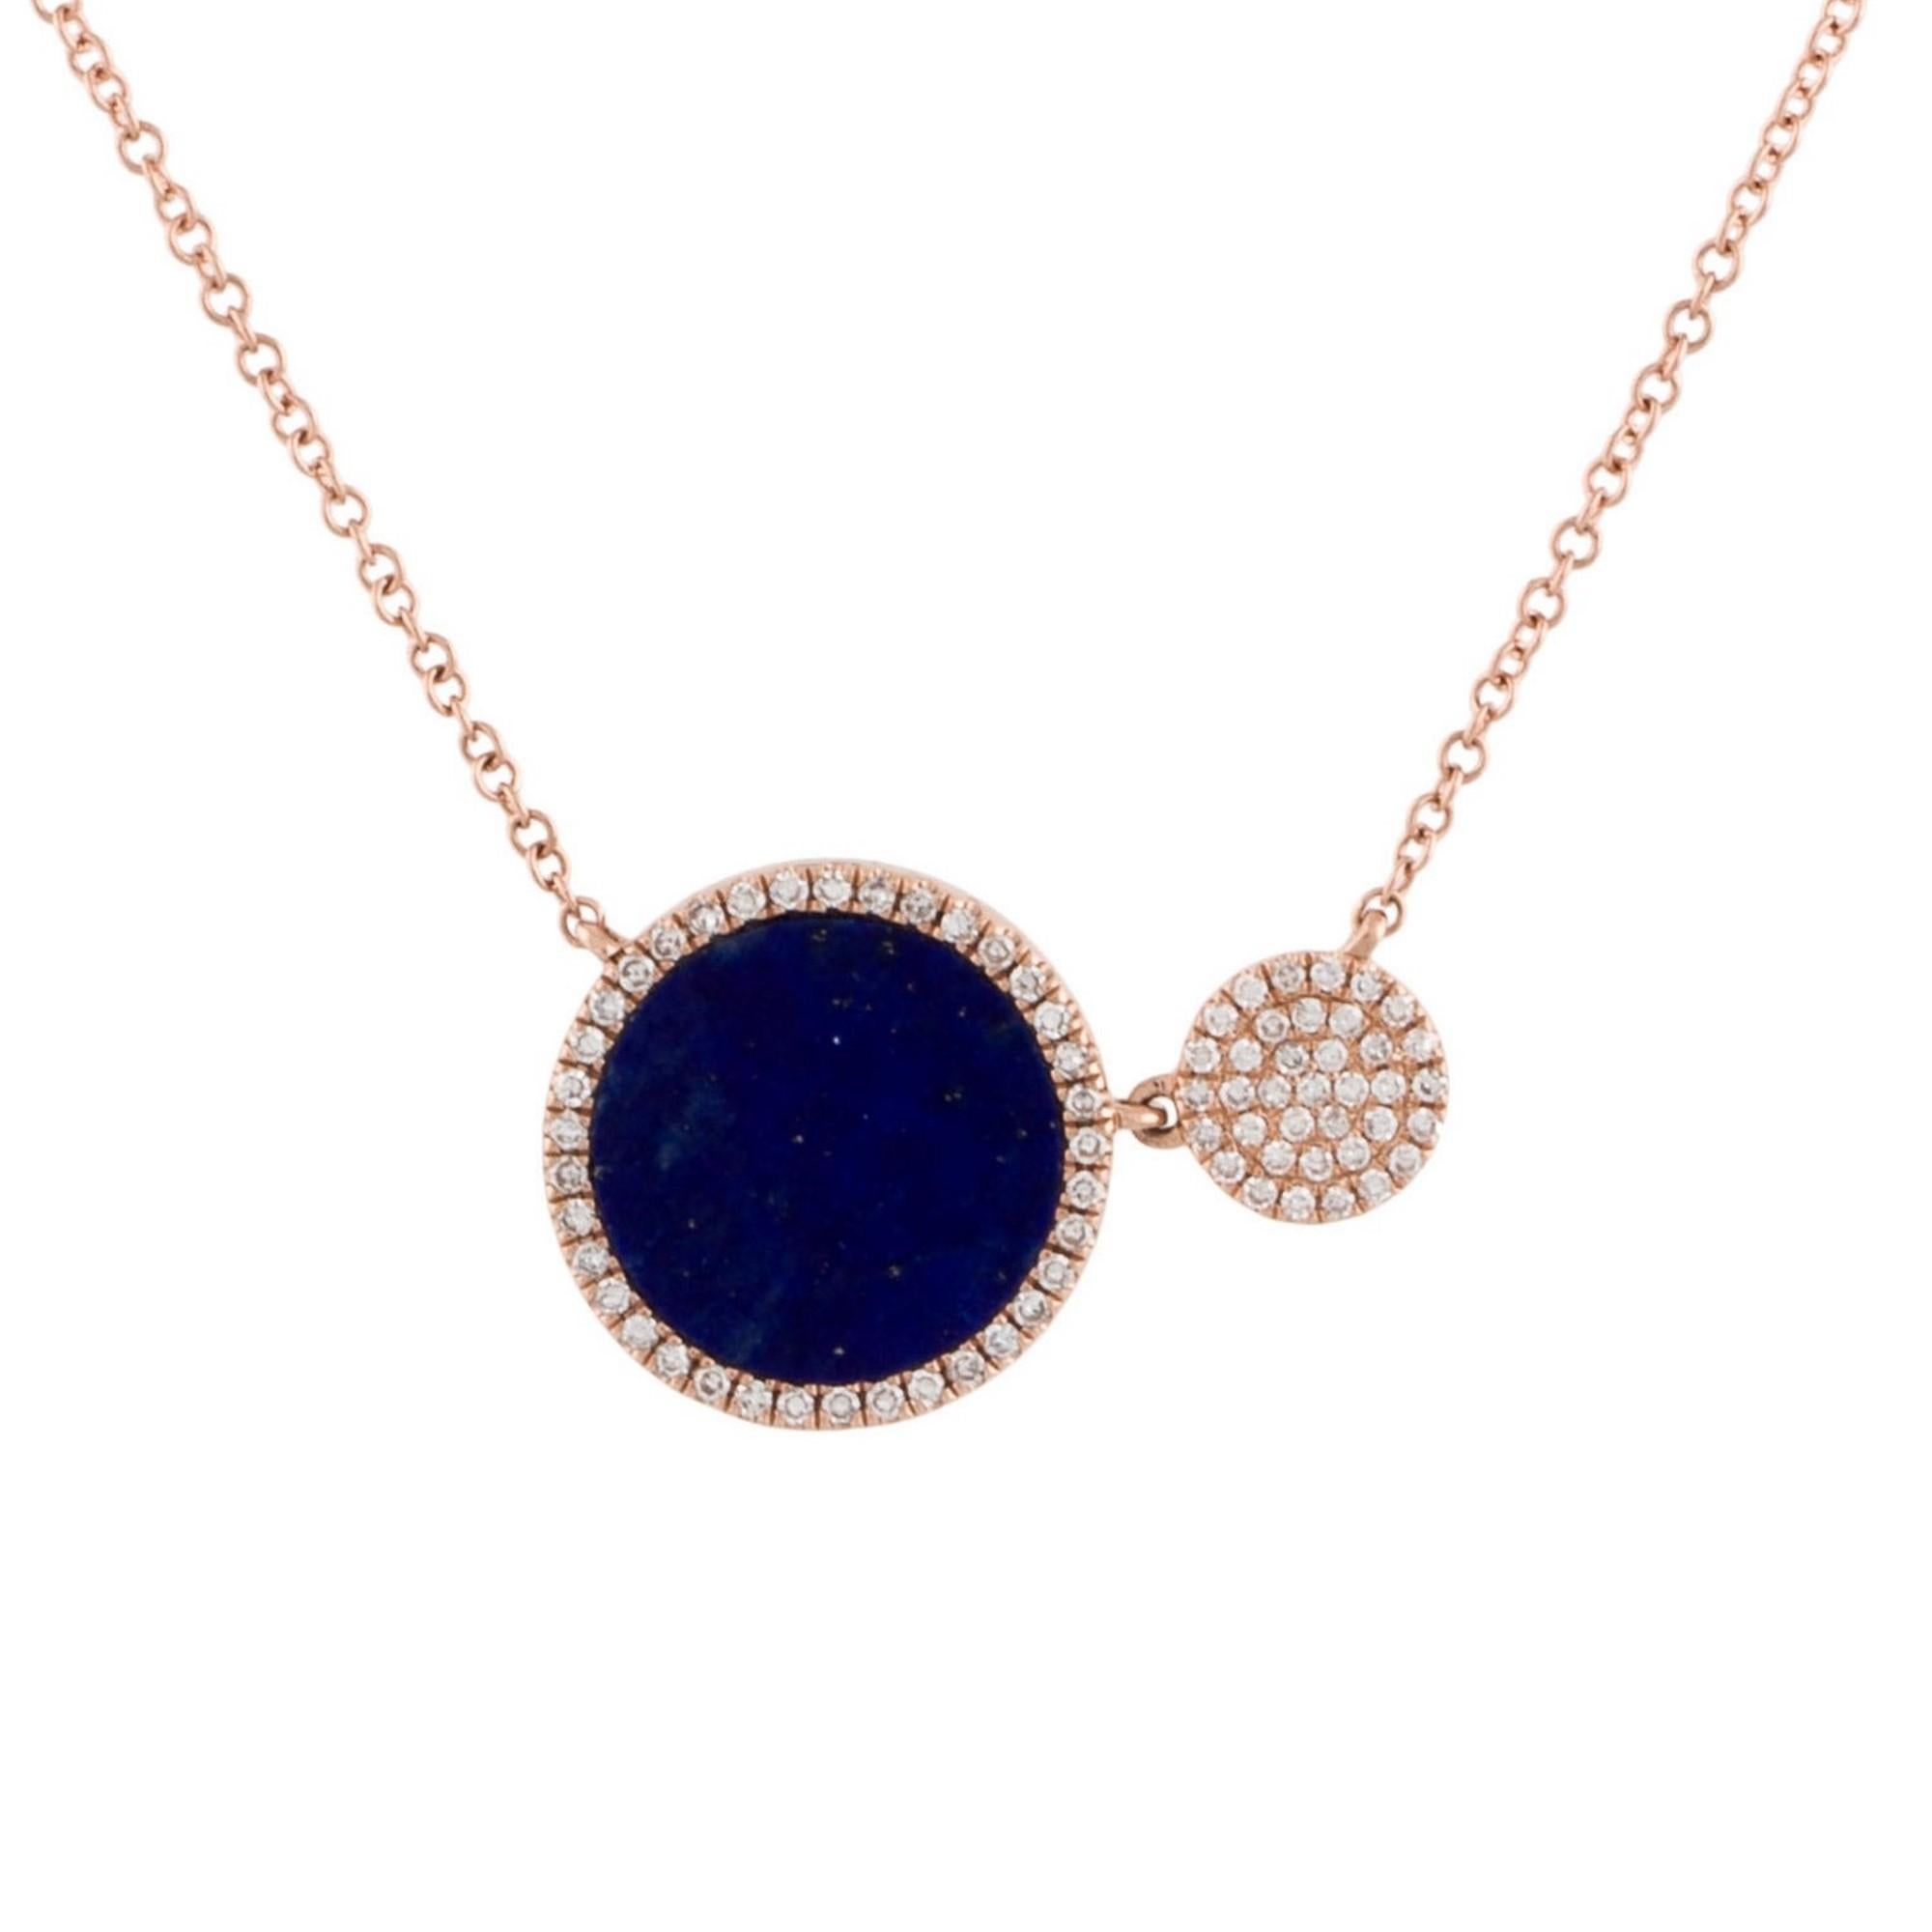 This Beautiful and Vibrant Flower Necklace is crafted of 14K Rose Gold featuring approximately 0.22 ct. of round Natural Diamonds and a Gorgeous Lapis 1.68 ct. Circle cut stone. Chain is Adjustable to 16, 17 & 18